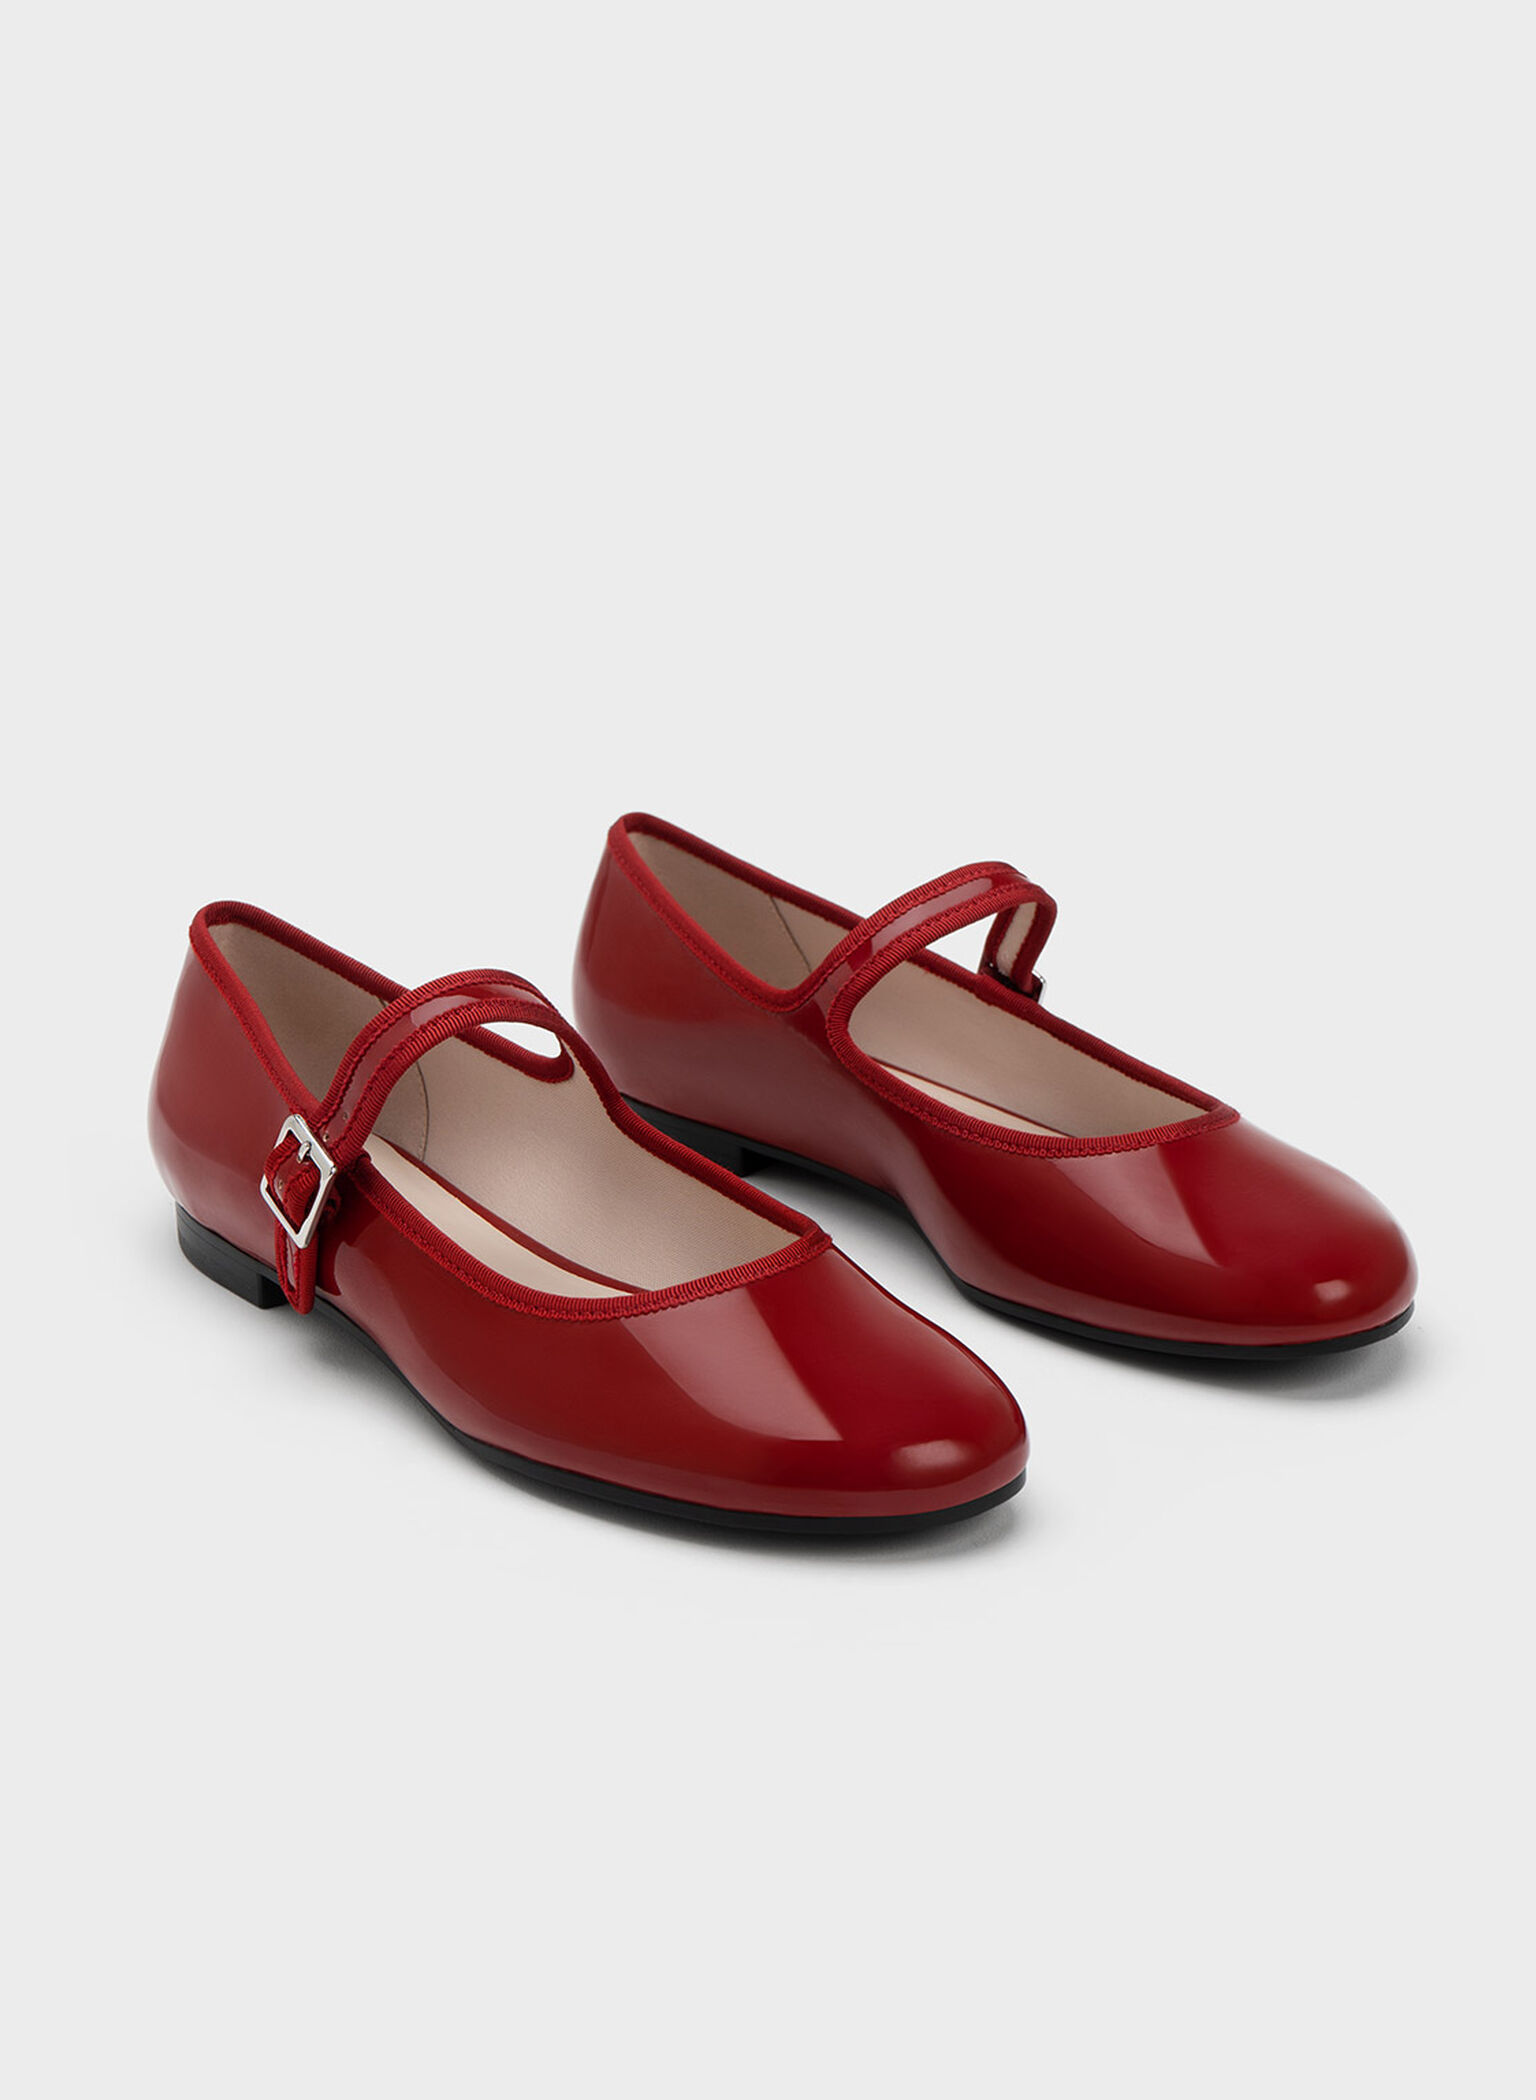 Patent Buckled Mary Jane Flats, Red, hi-res